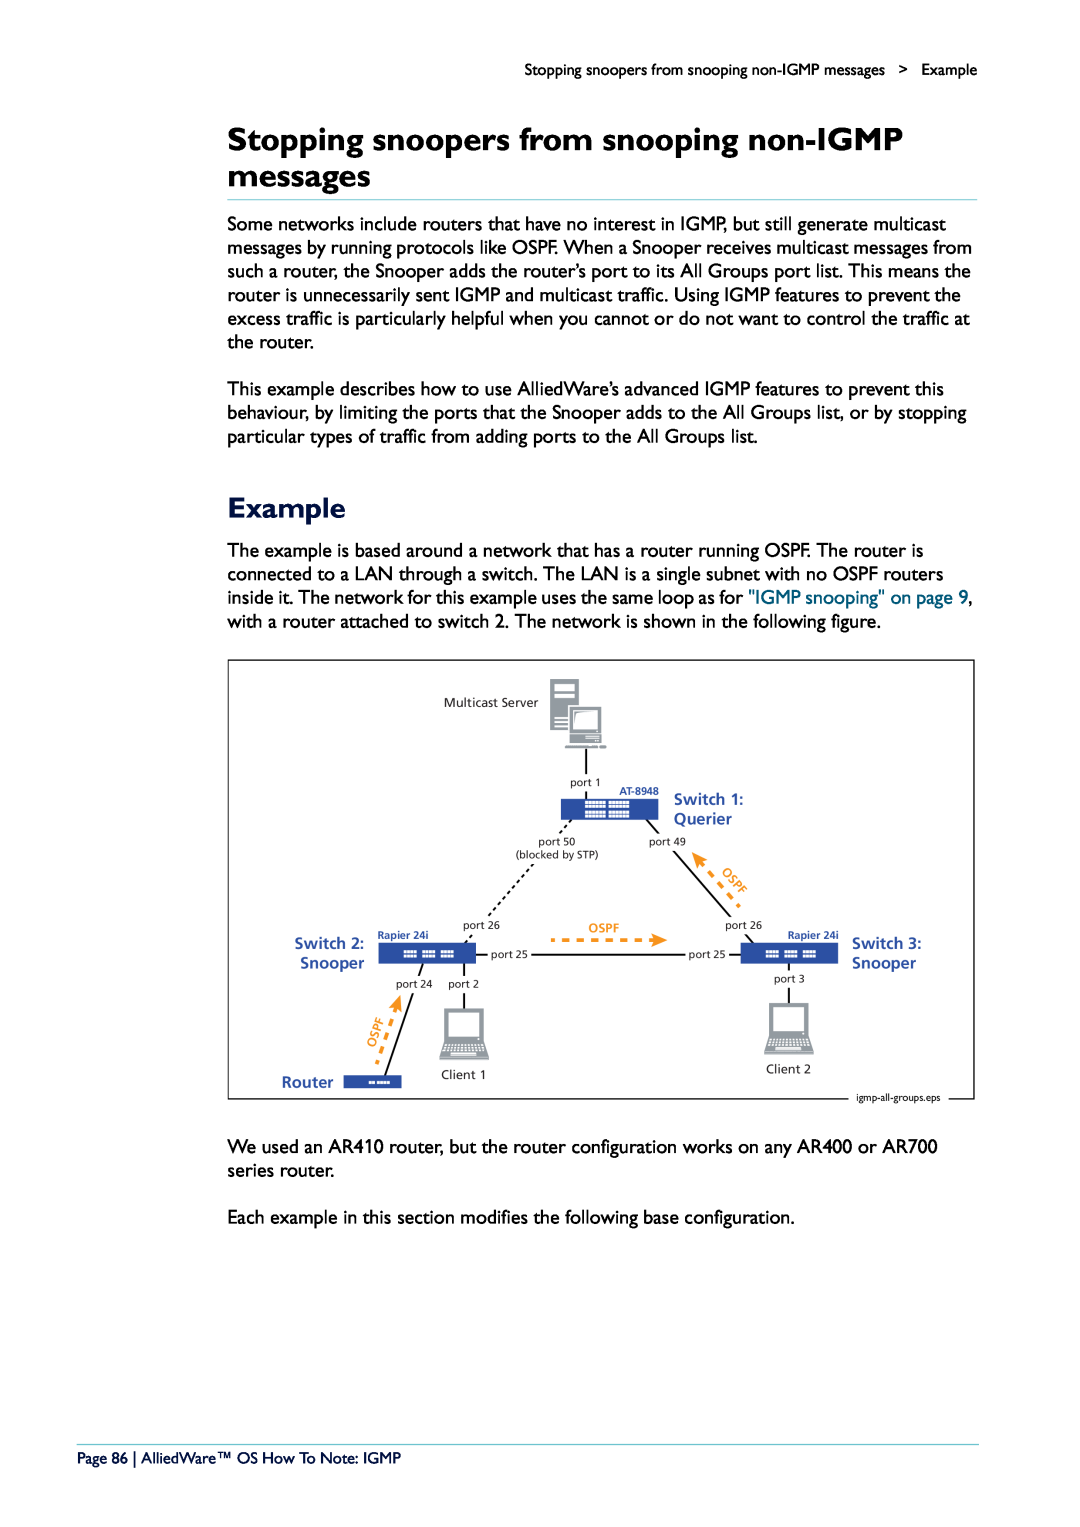 Allied Telesis AR400 manual Stopping snoopers from snooping non-IGMP messages, Example, Ospf 